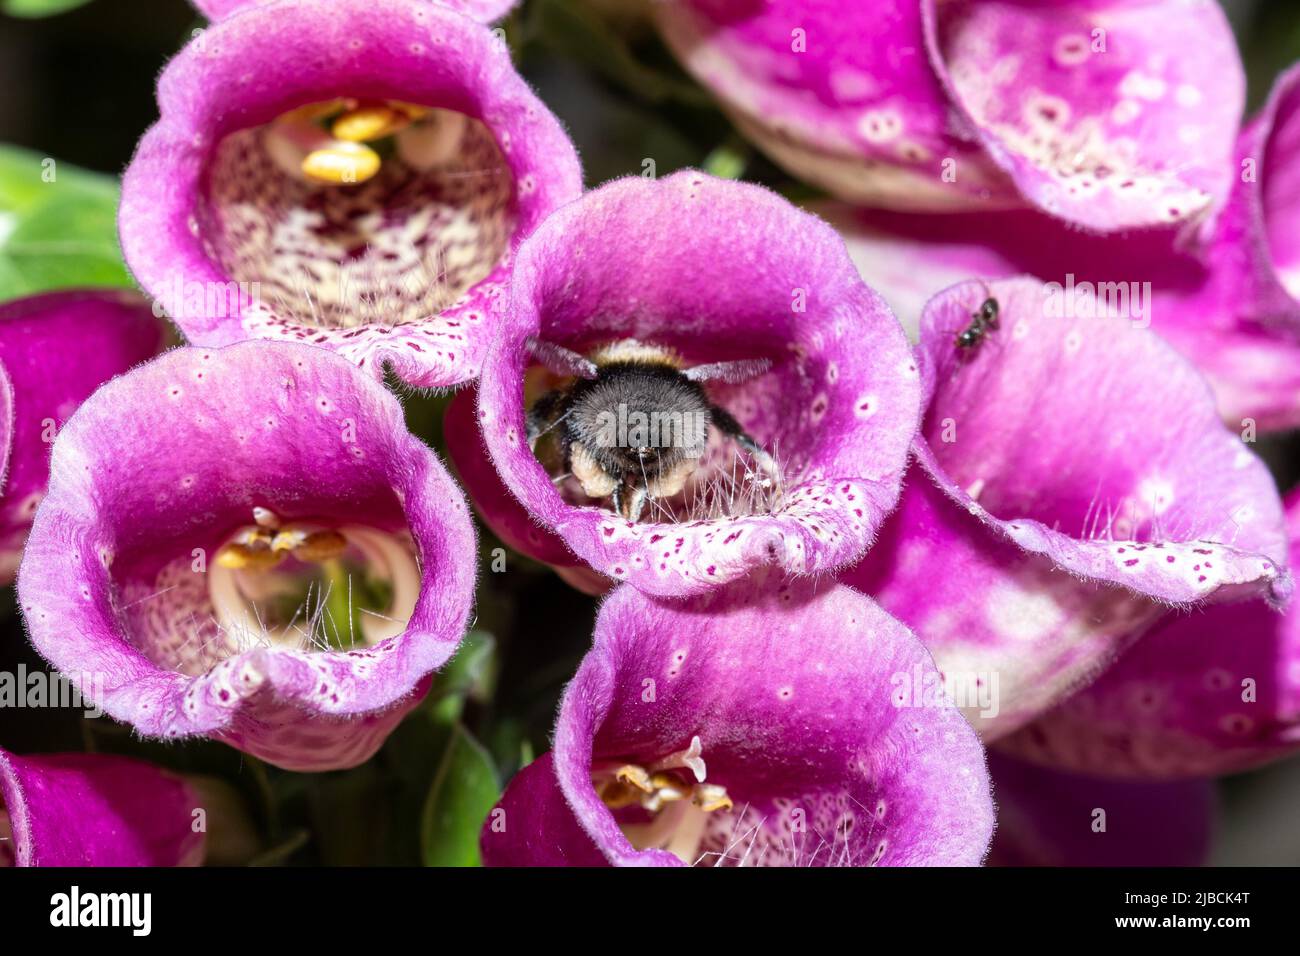 A bumblebee, which is an important insect pollinator, nectaring inside a foxglove flower during June, England, UK Stock Photo